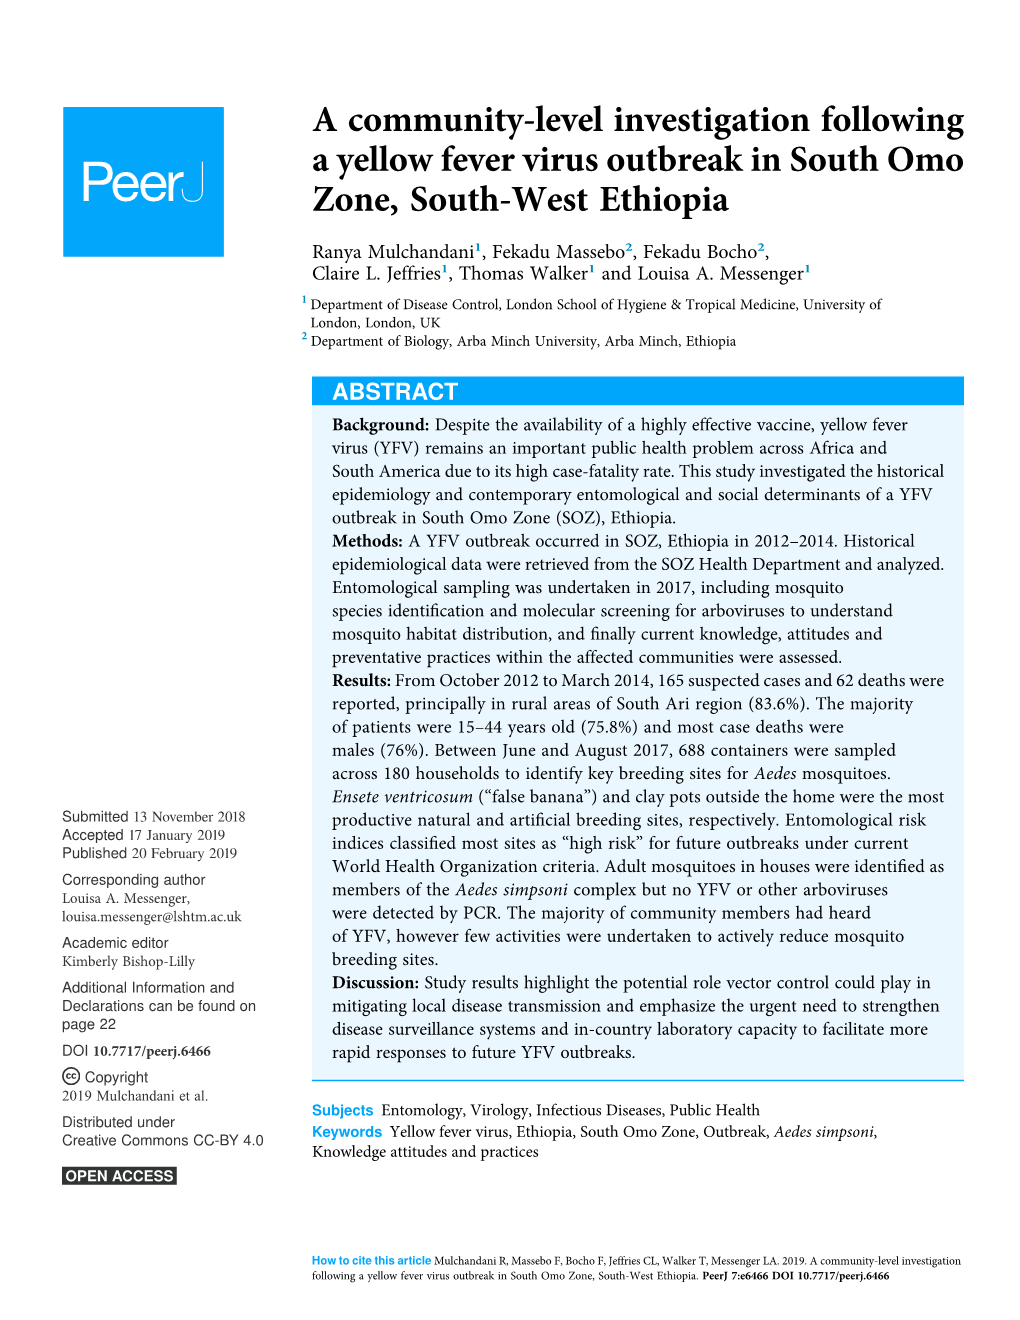 A Community-Level Investigation Following a Yellow Fever Virus Outbreak in South Omo Zone, South-West Ethiopia